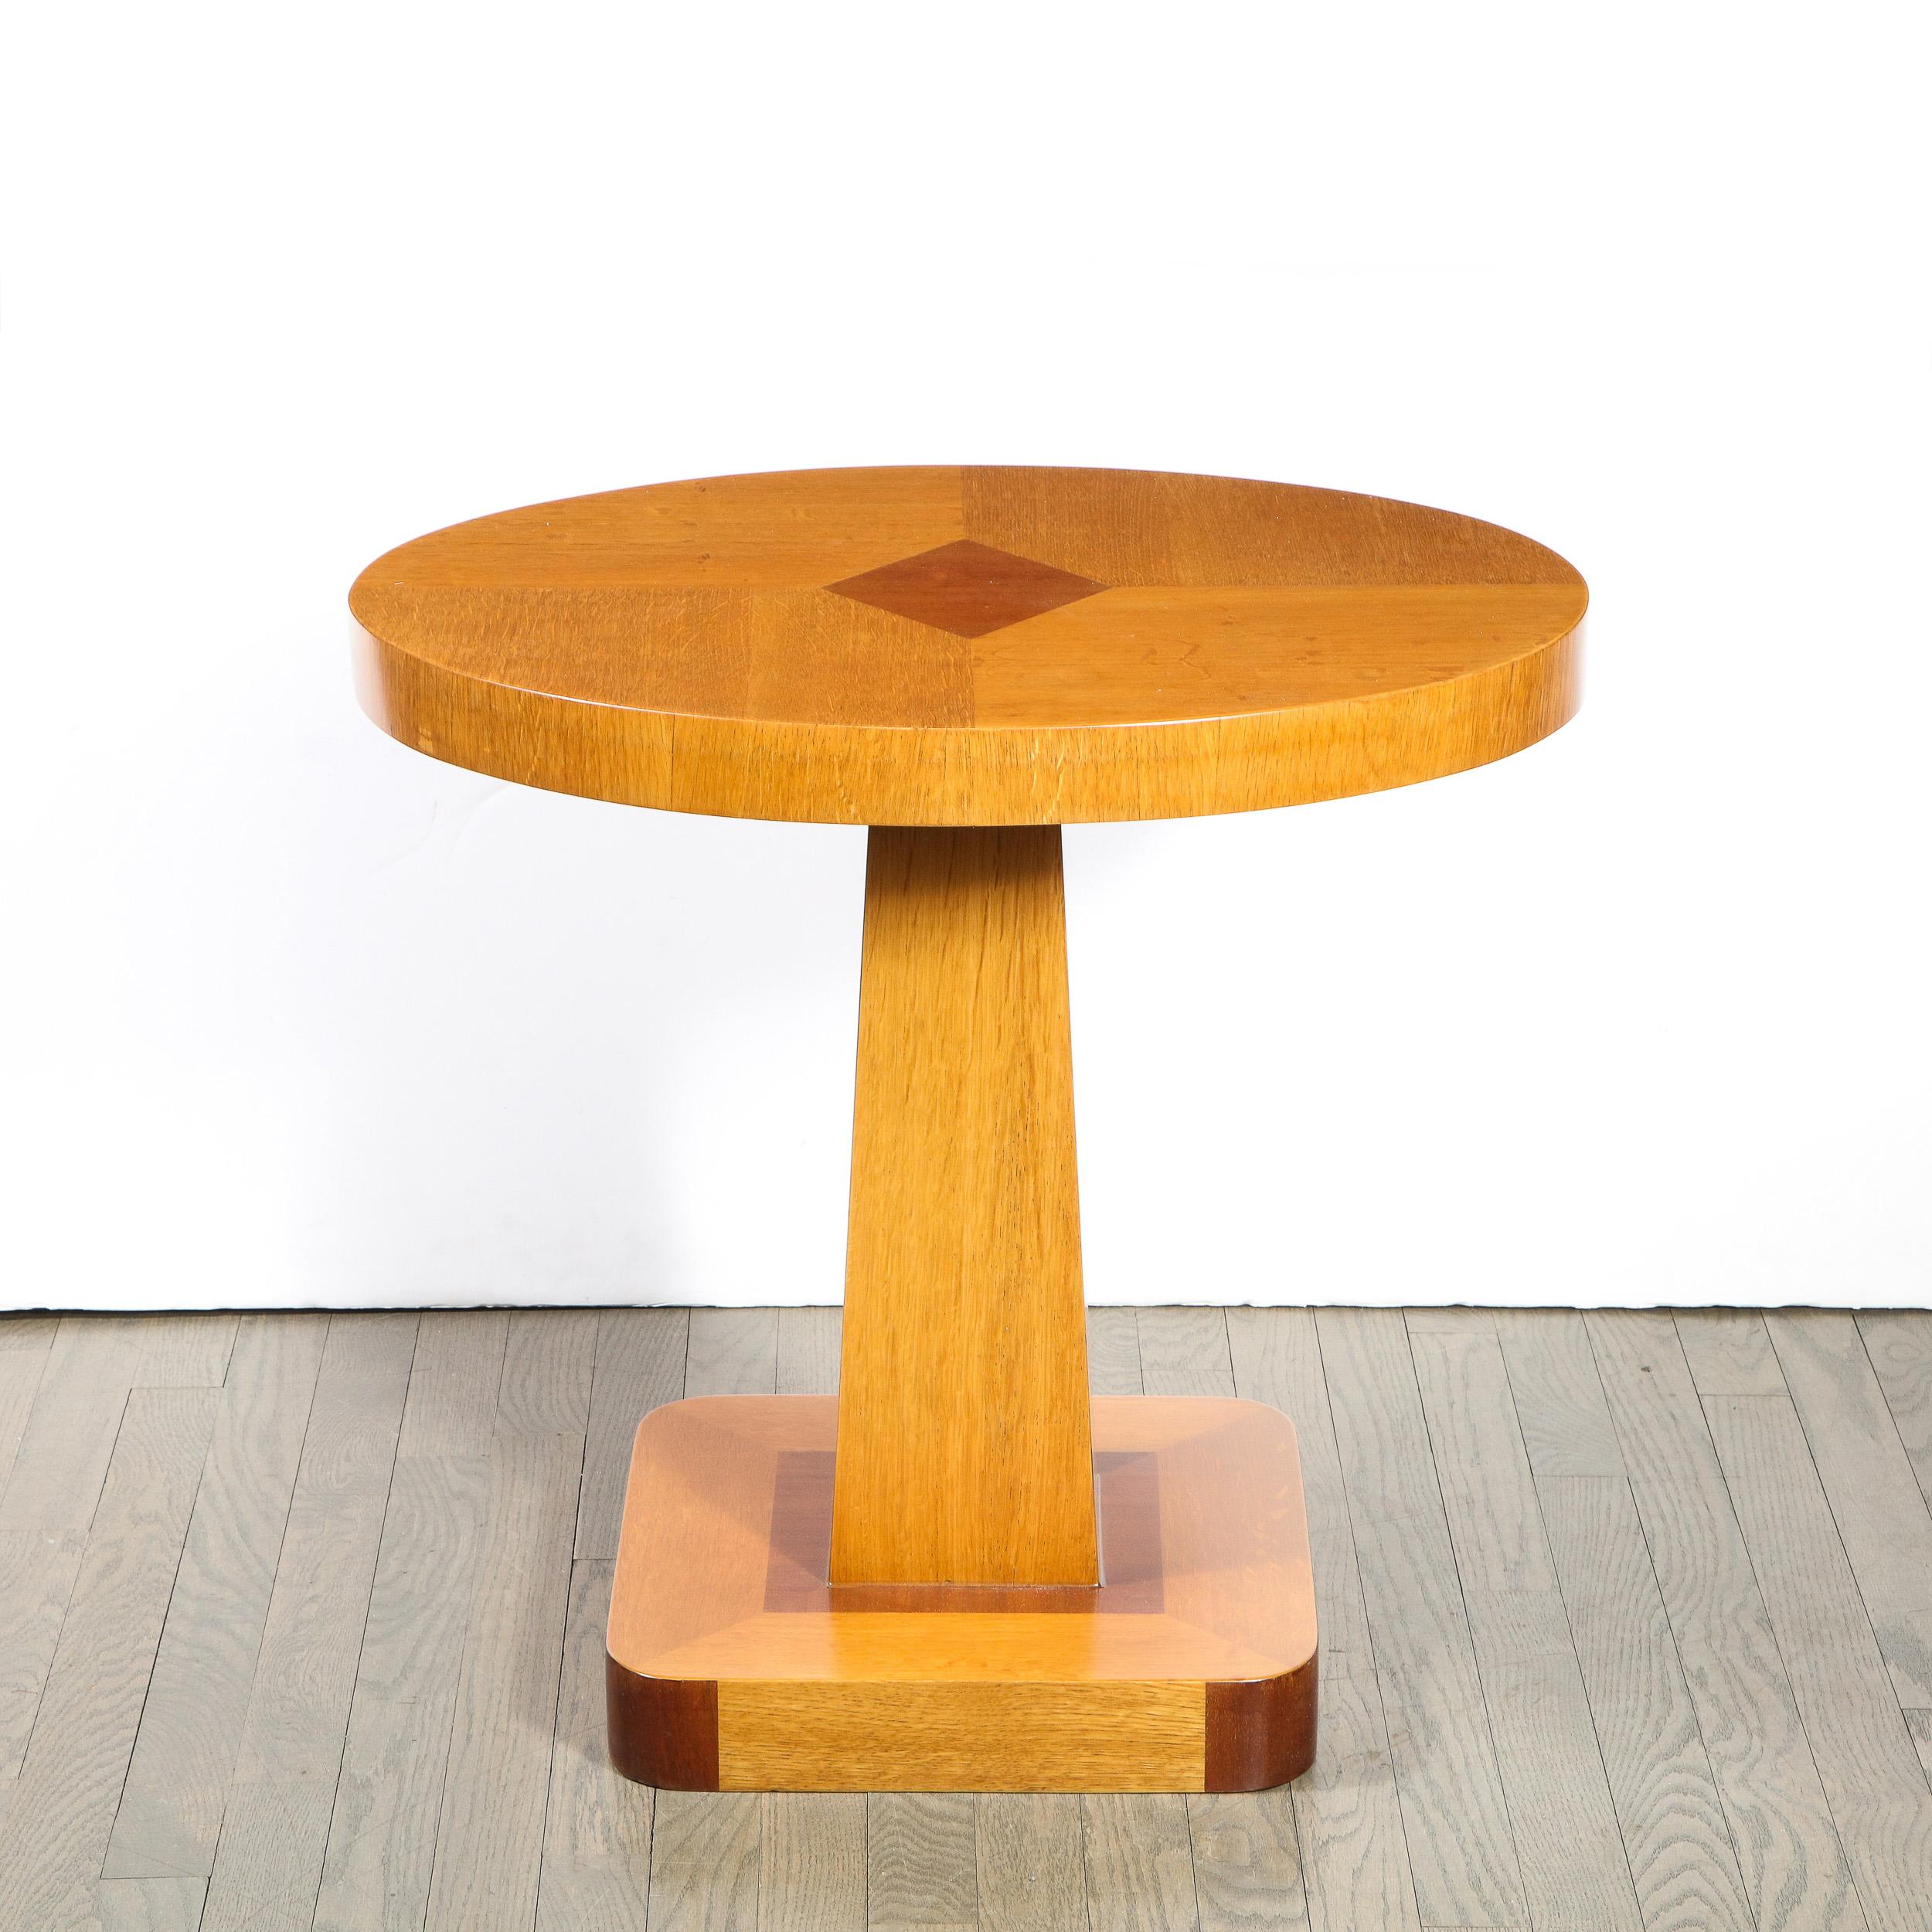 This stunning pair of Mid-Century Modern geometric oval occasional/ end tables were realized in the United States, circa 1950. They feature oval tops in hand rubbed bookmatched Elm with diamond form detailing inlaid in Walnut in the center of each.